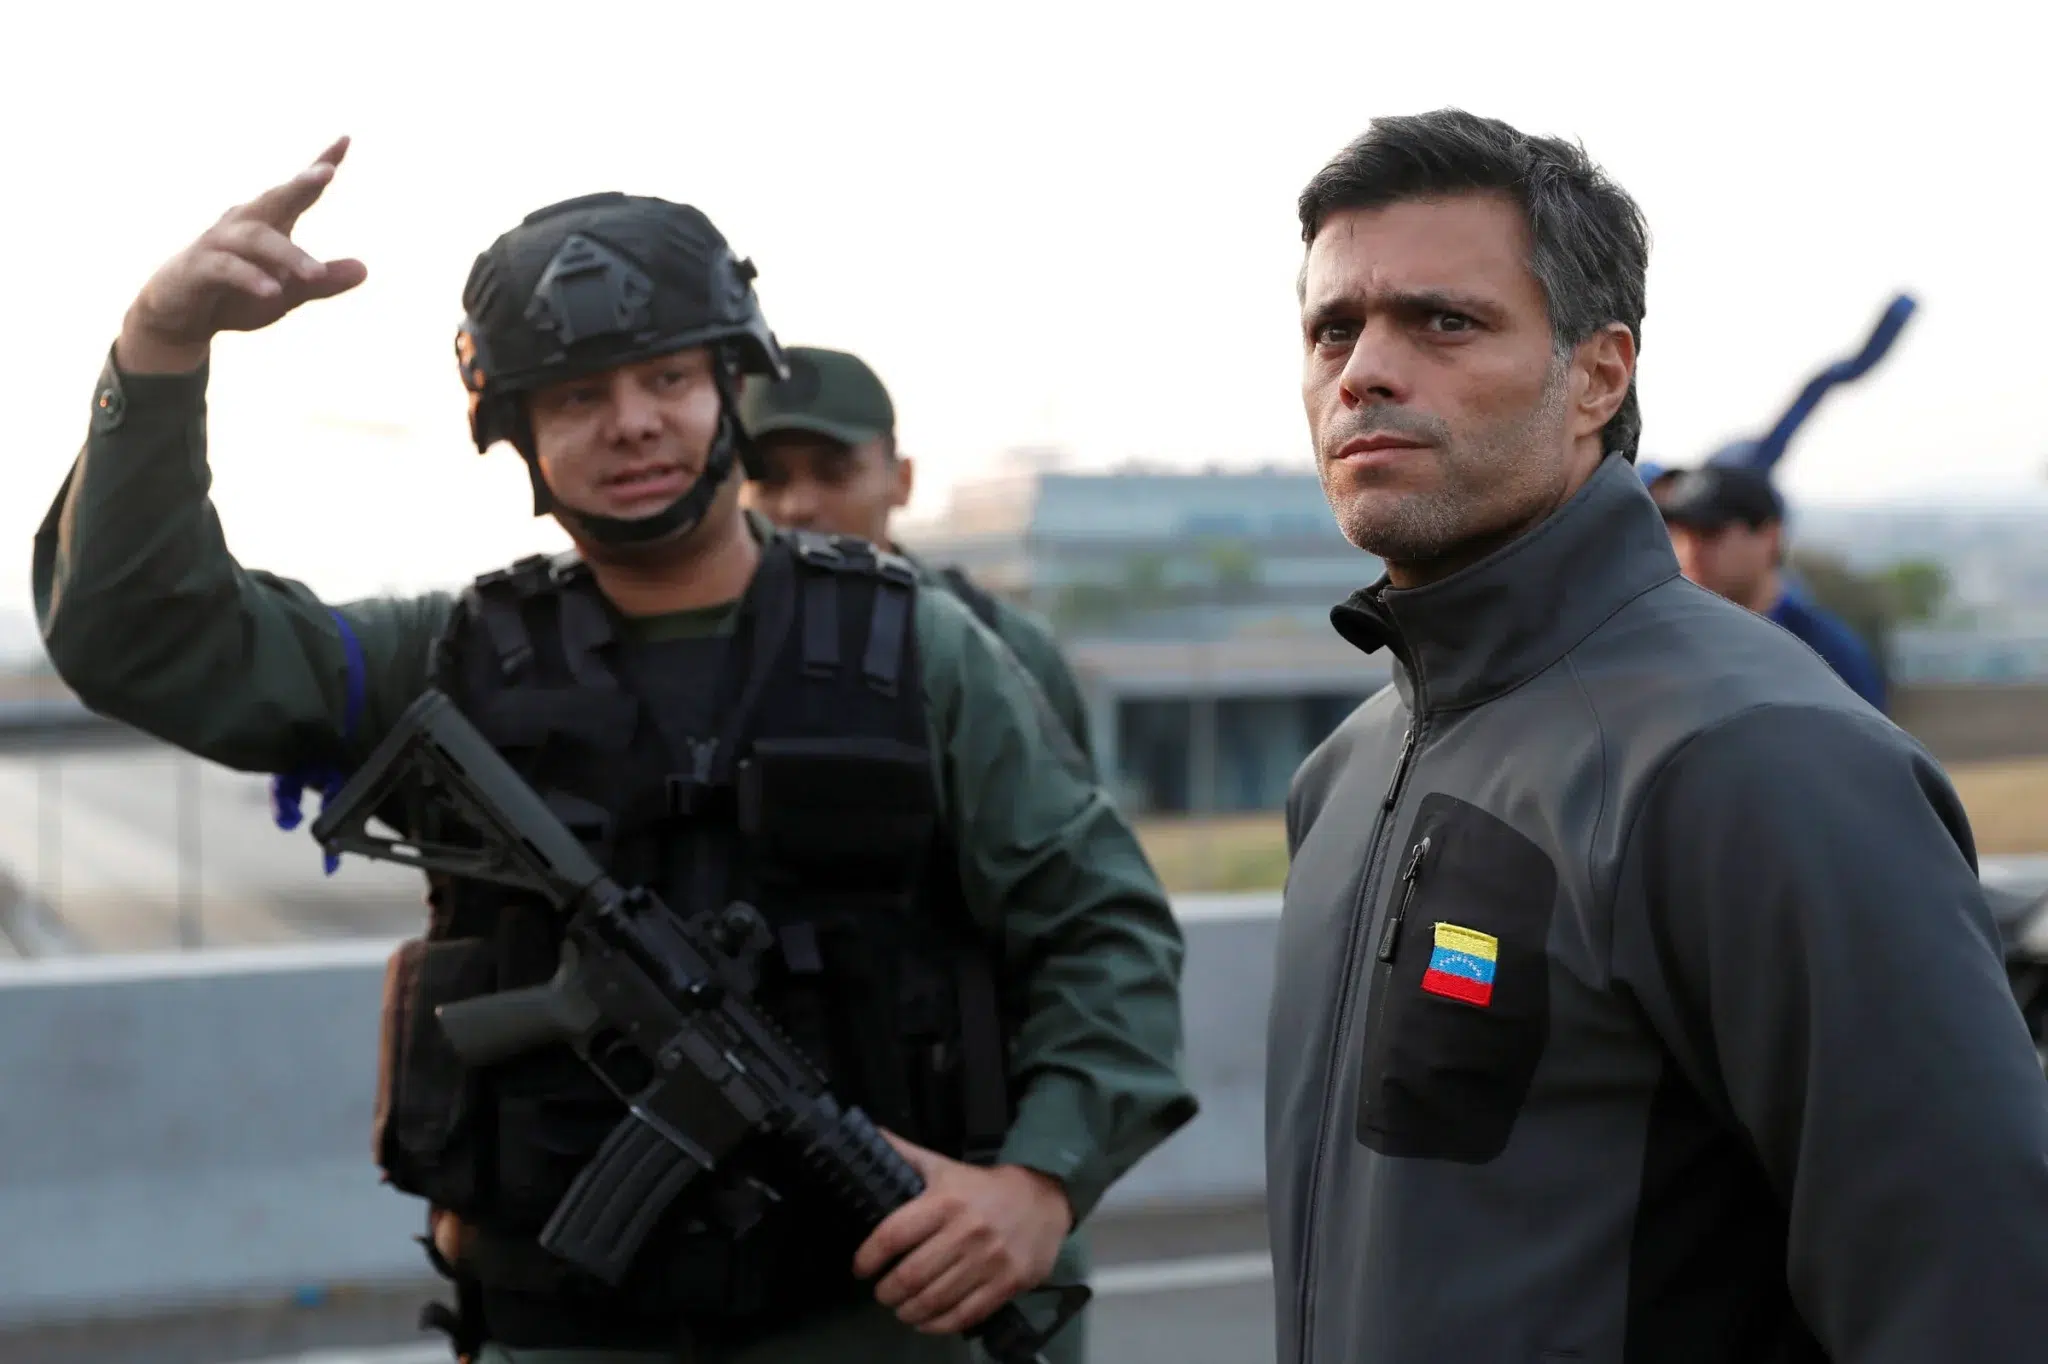 Far-right opposition politician Leopoldo López at the La Carlota air base (Caracas) being escorted by rebel military officers during the failed coup d'état organized by him and Juan Guaidó on April 30, 2019. Photo: Carlos Garcia Rawlins/Reuters.